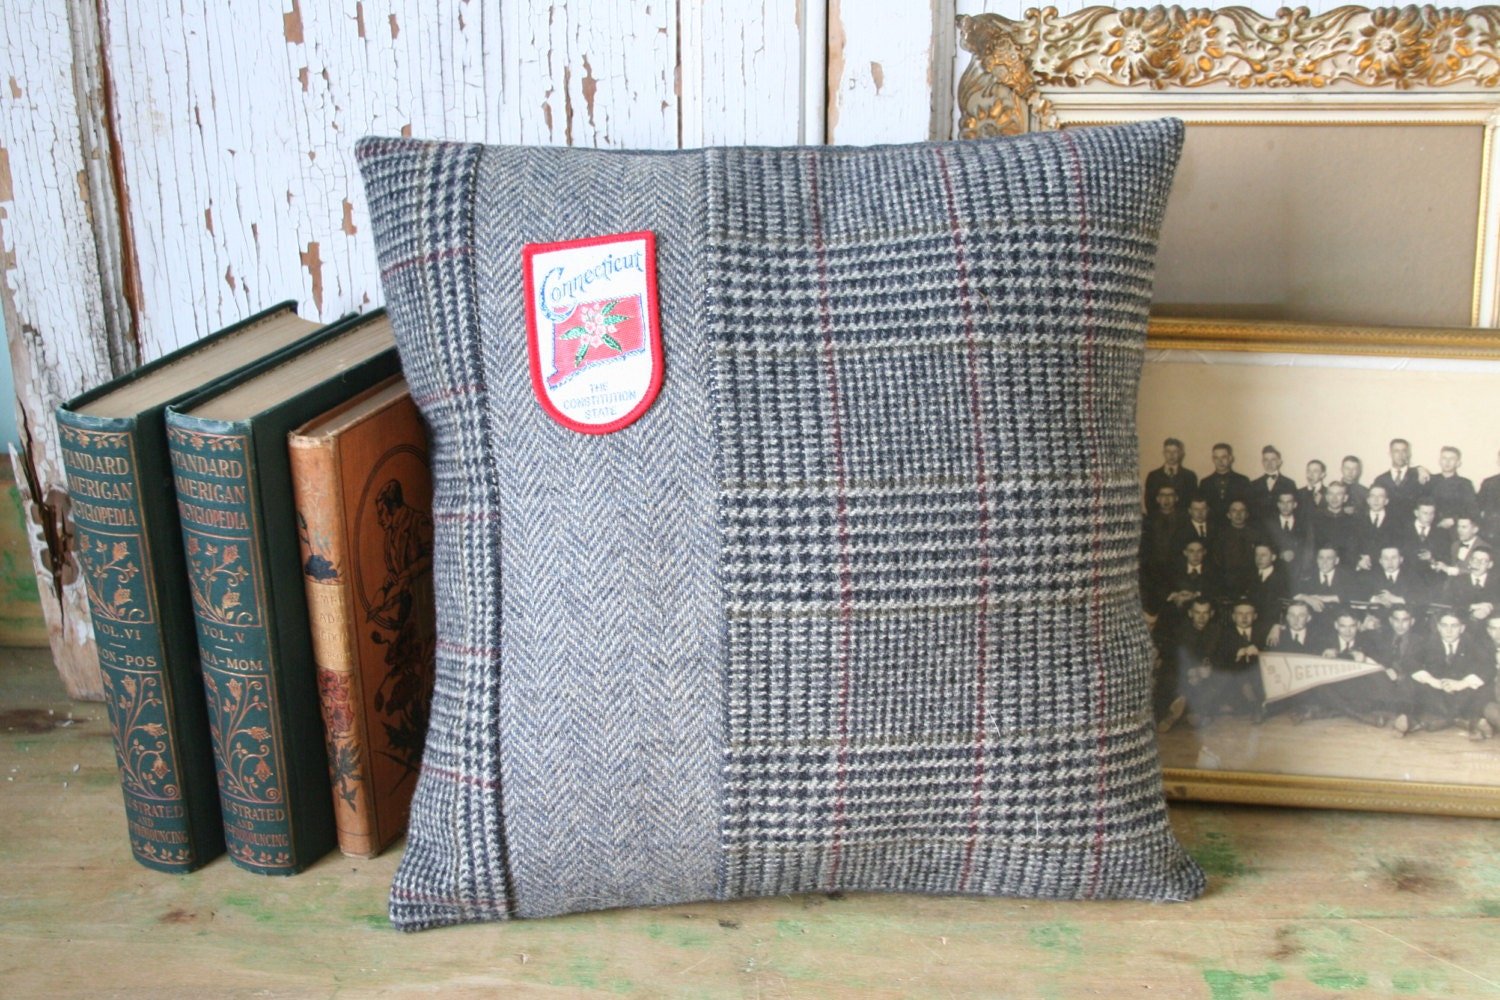 Wool Tweed Connecticut State PILLOW COVER - Recycled, Handmade, Sustainable Decor